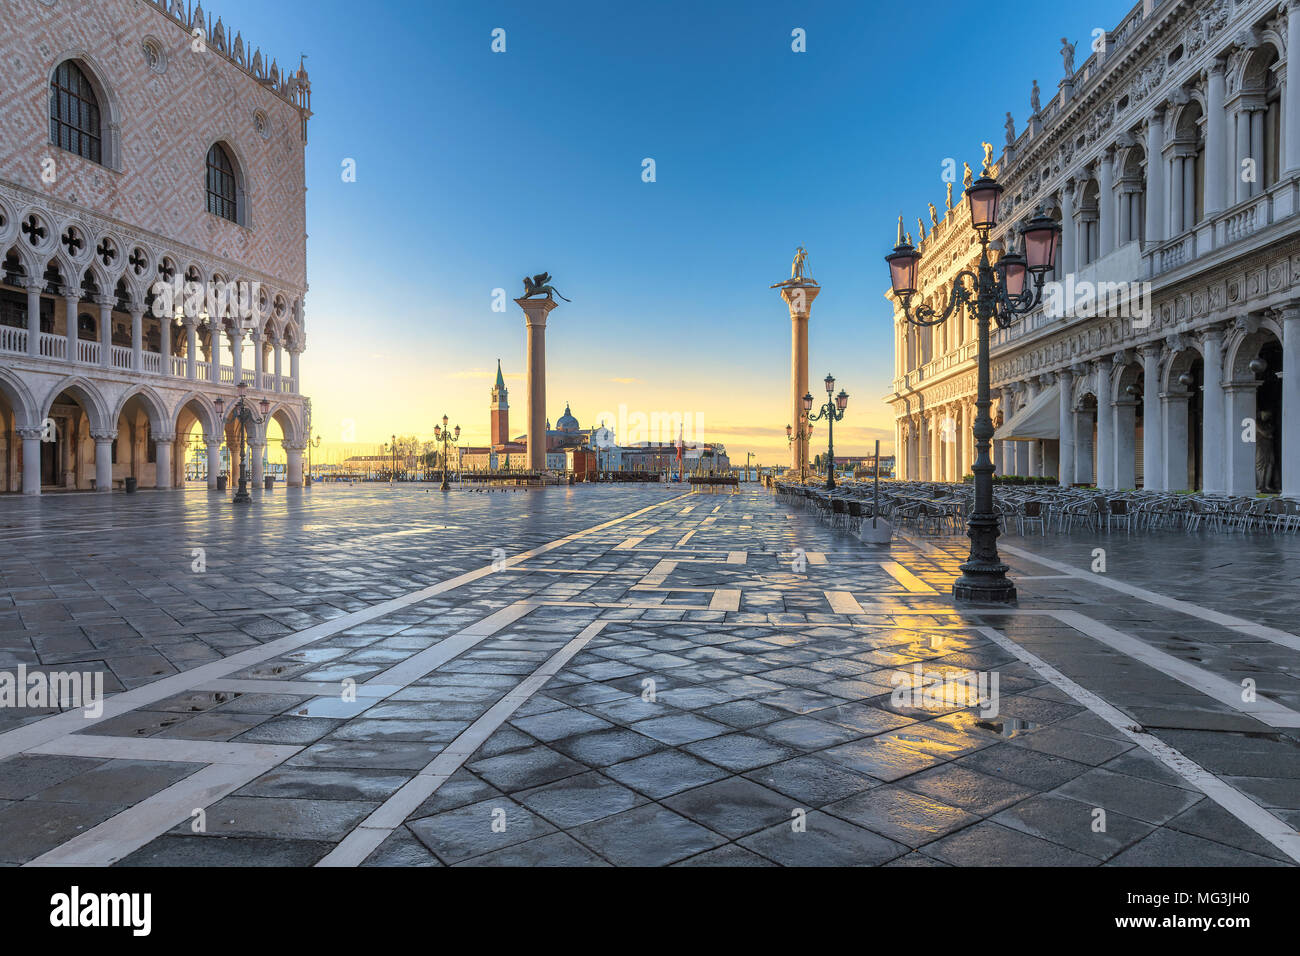 Sunrise view at San Marco Square in Venice, Italy. Stock Photo